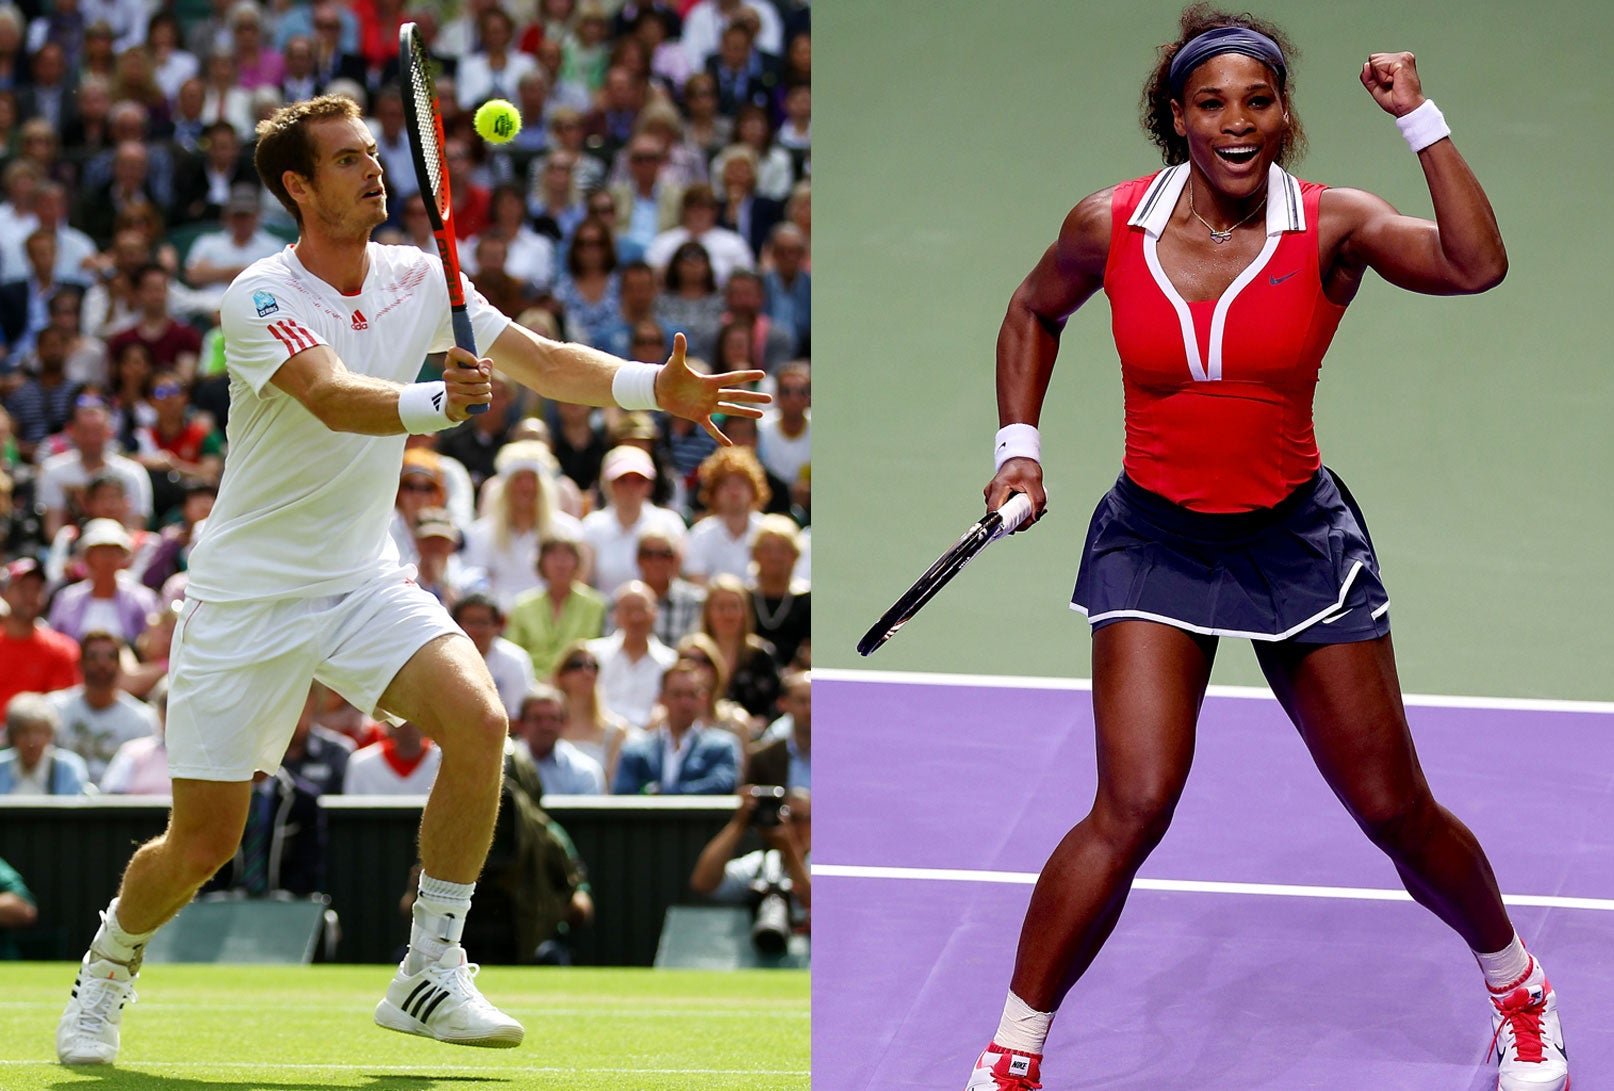 Williams vs. Murray: Who would win?